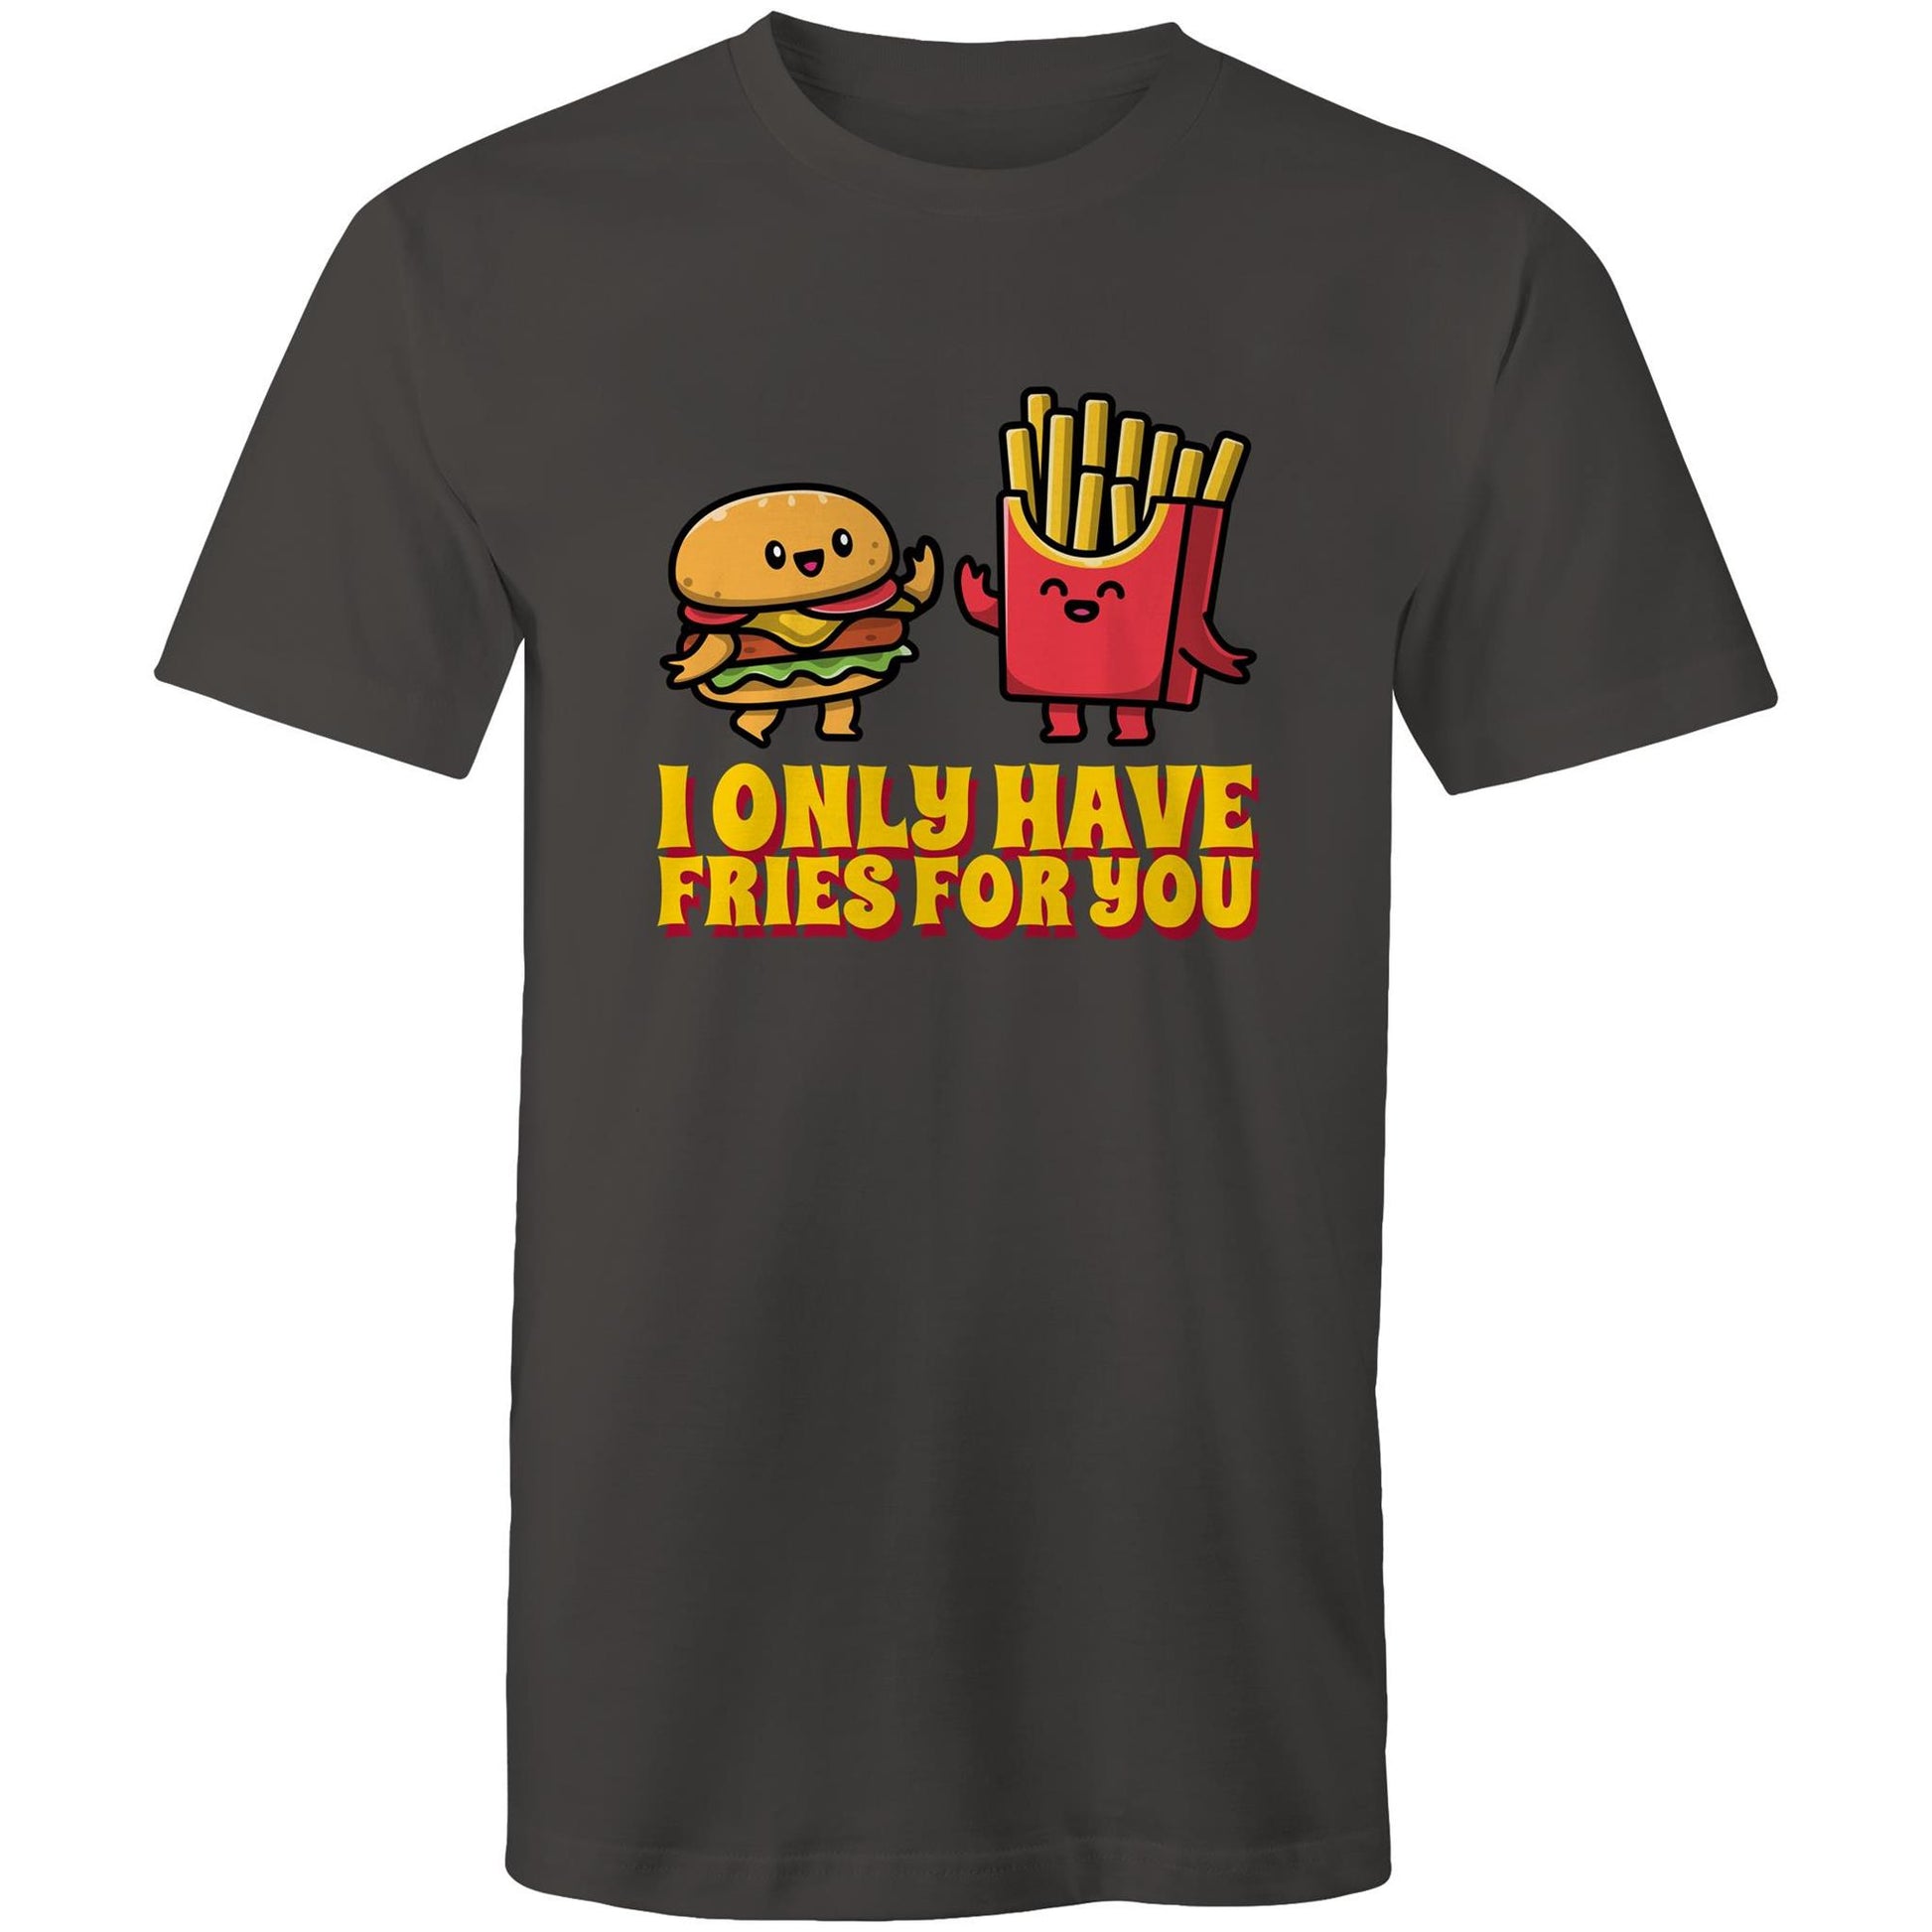 I Only Have Fries For You, Burger And Fries - Mens T-Shirt Charcoal Mens T-shirt